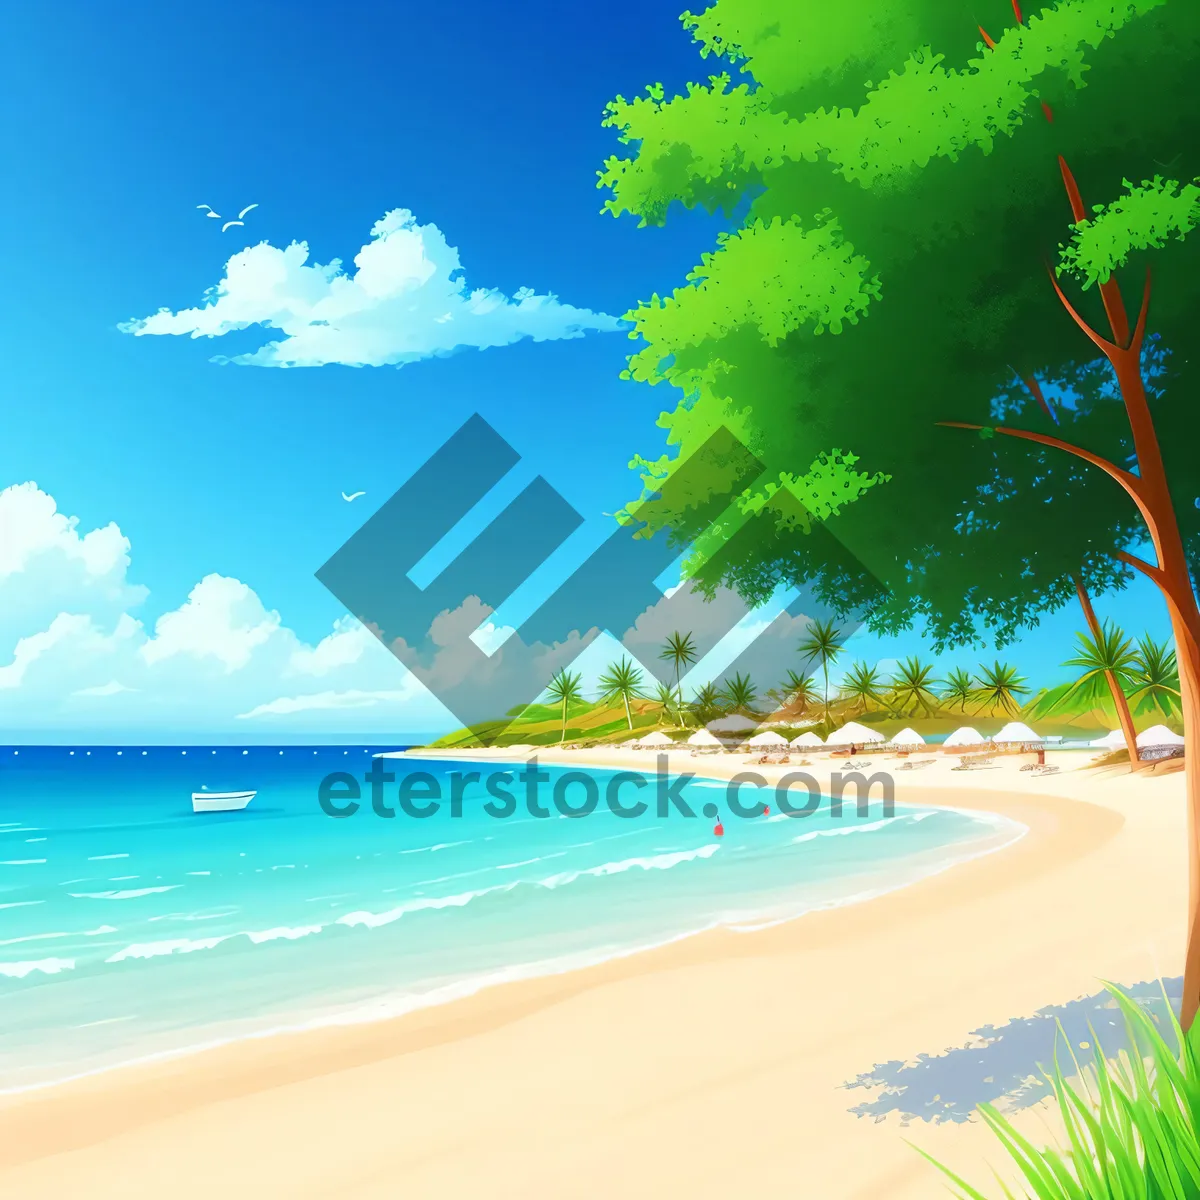 Picture of Serene Seascape: Beach Bliss under Turquoise Skies